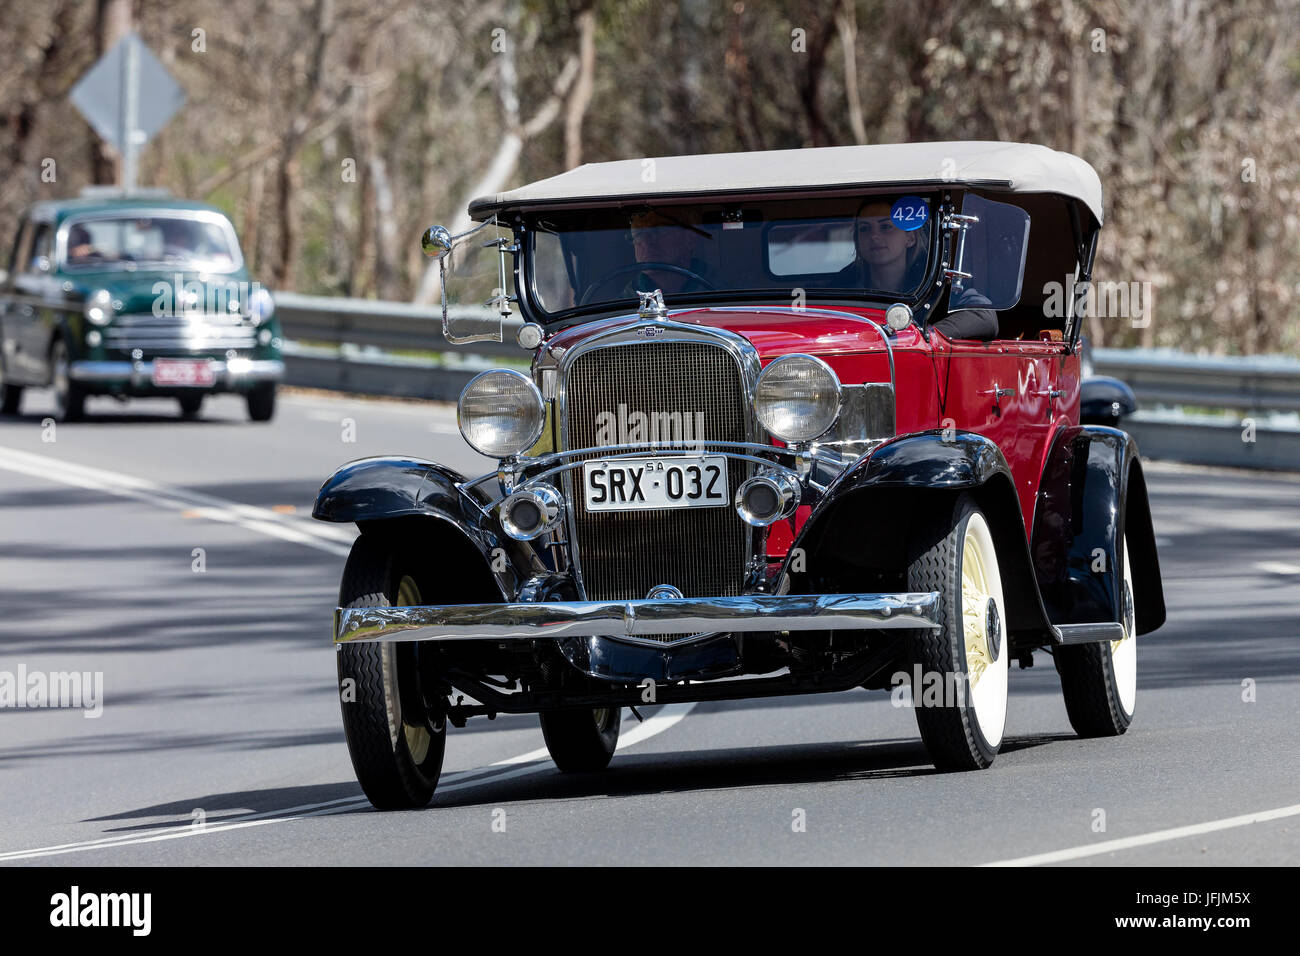 Vintage 1932 Chevrolet Confederate Sports Roadster  driving on country roads near the town of Birdwood, South Australia. Stock Photo